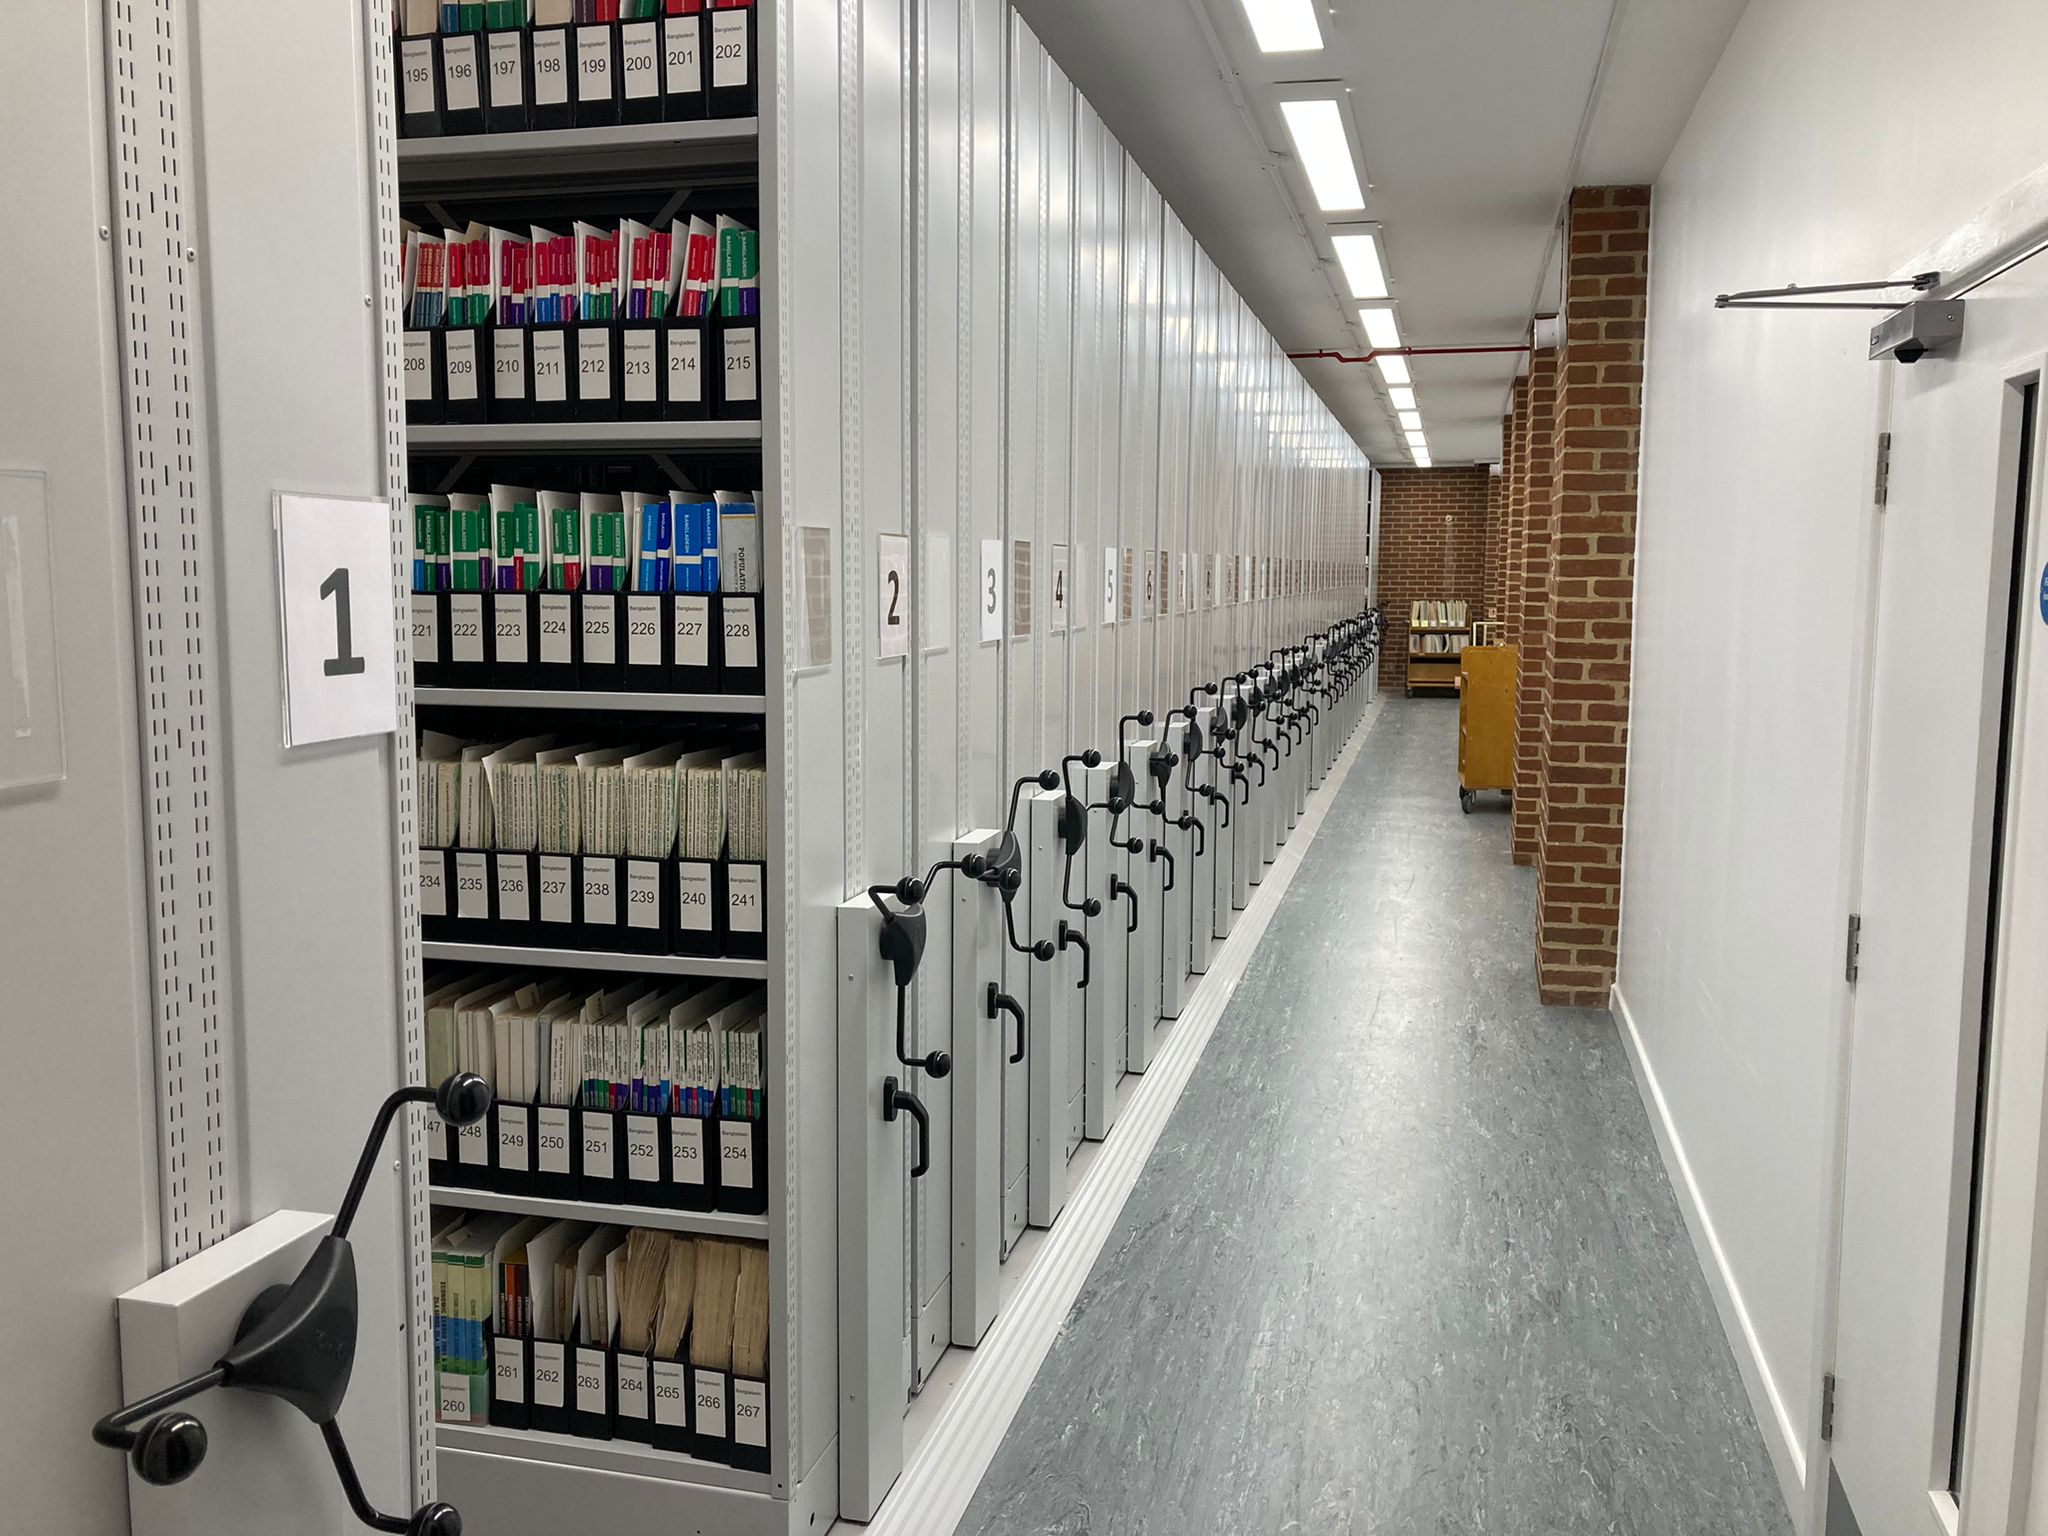 New roller-racking - grey metal shelving, with pamphlet boxes stored on them. Painted white walls and grey laminate flooring